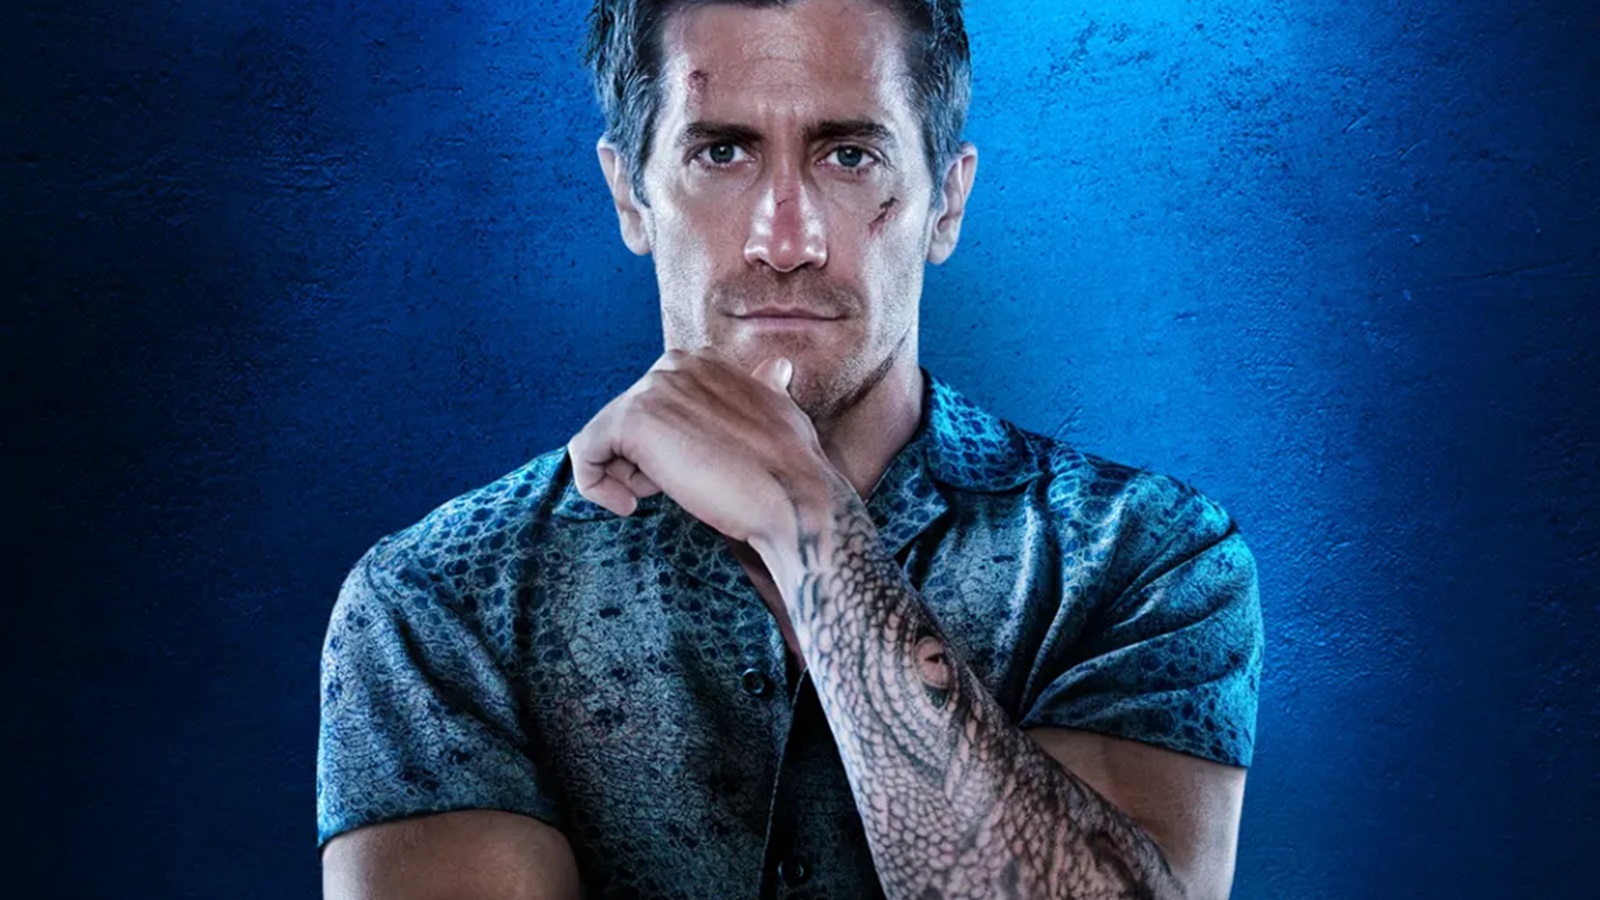 Road House: i character poster del film con star Jake Gyllenhaal